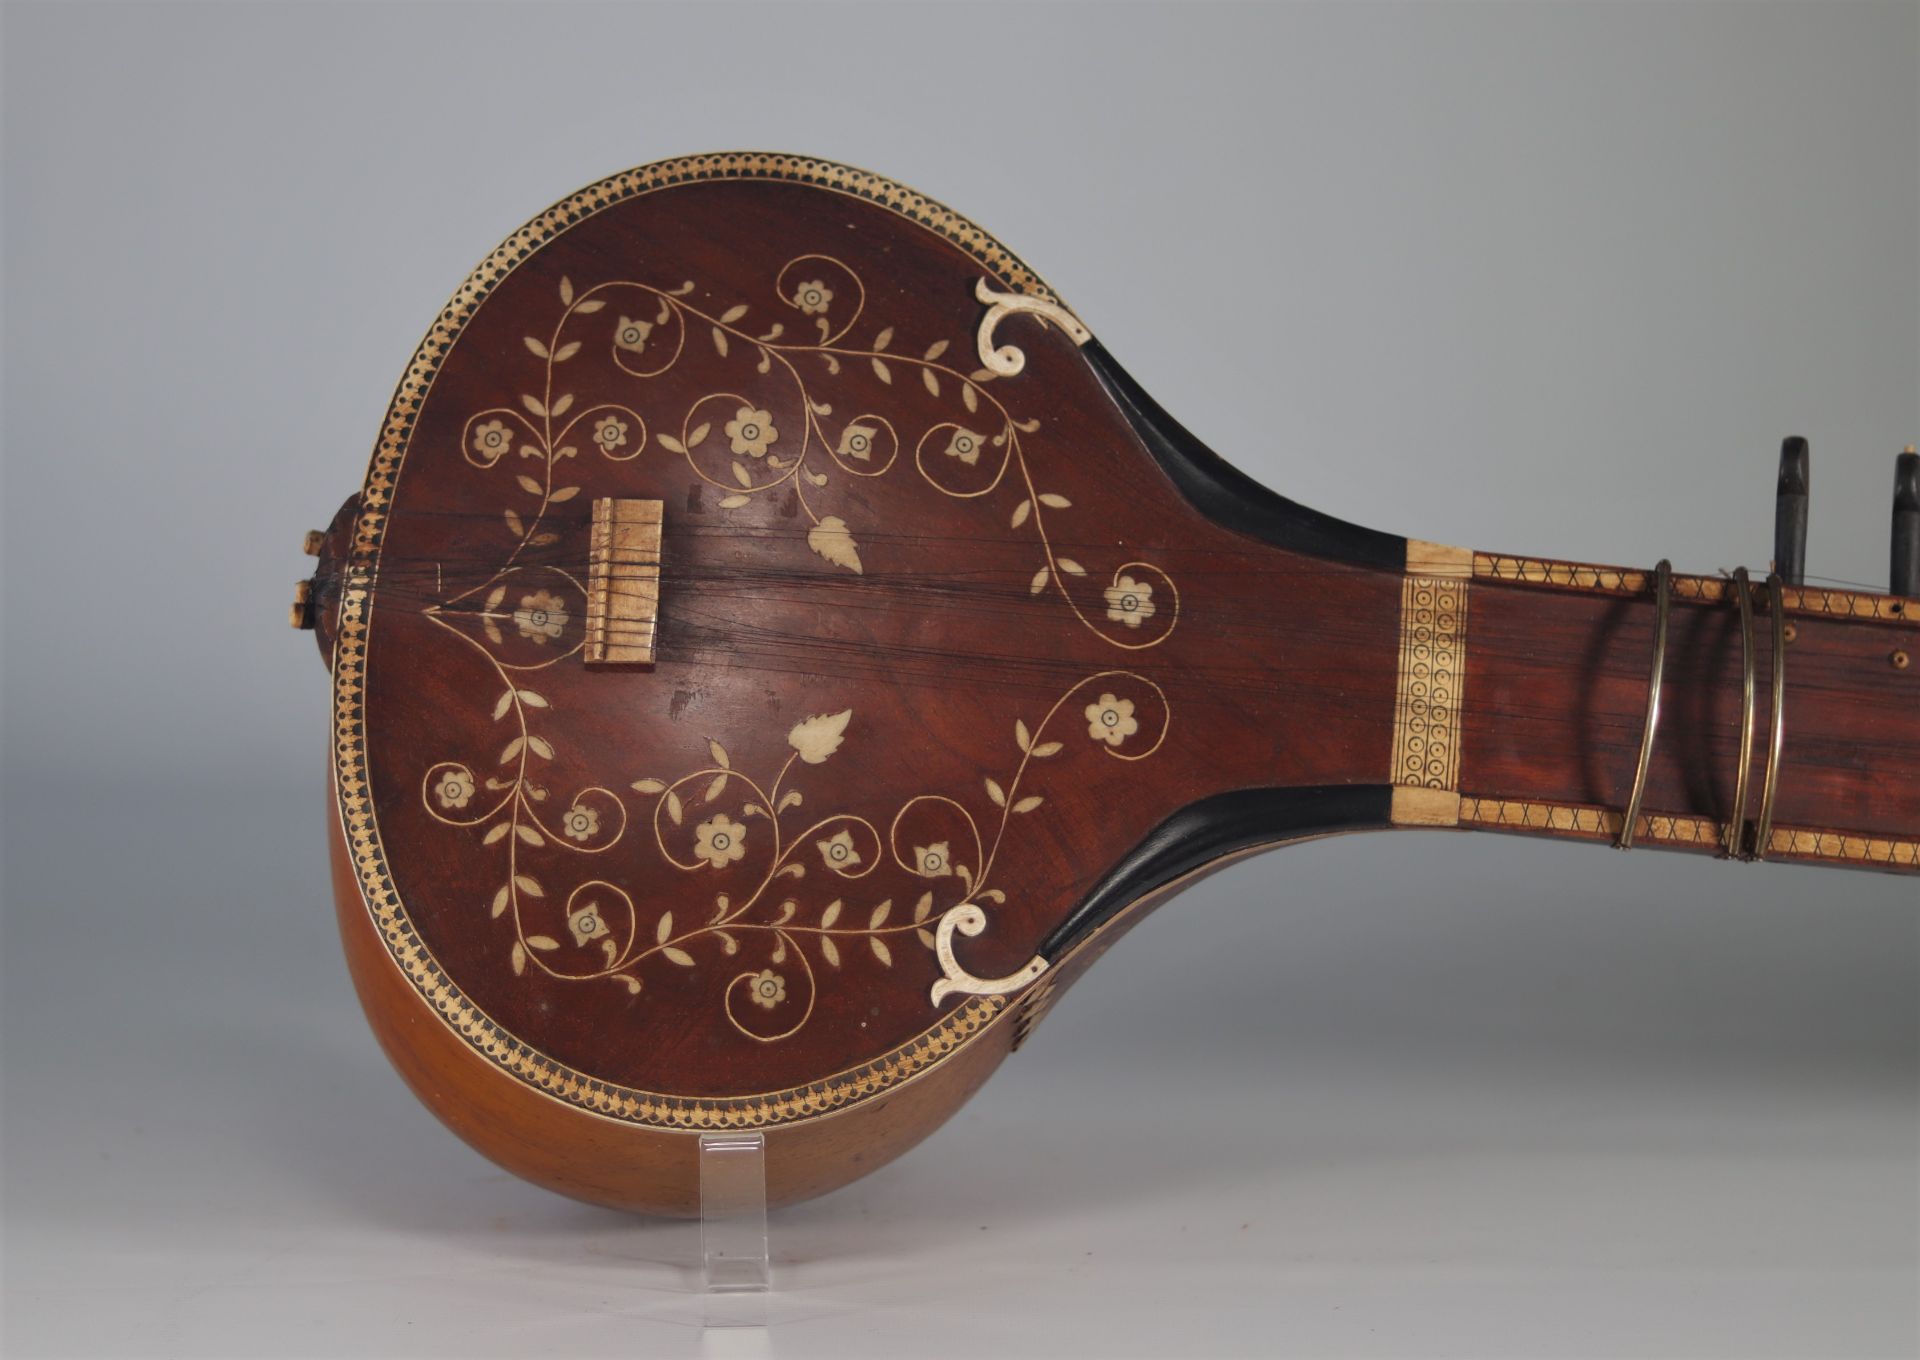 Stringed instrument called "La Vina" from India - Image 2 of 4